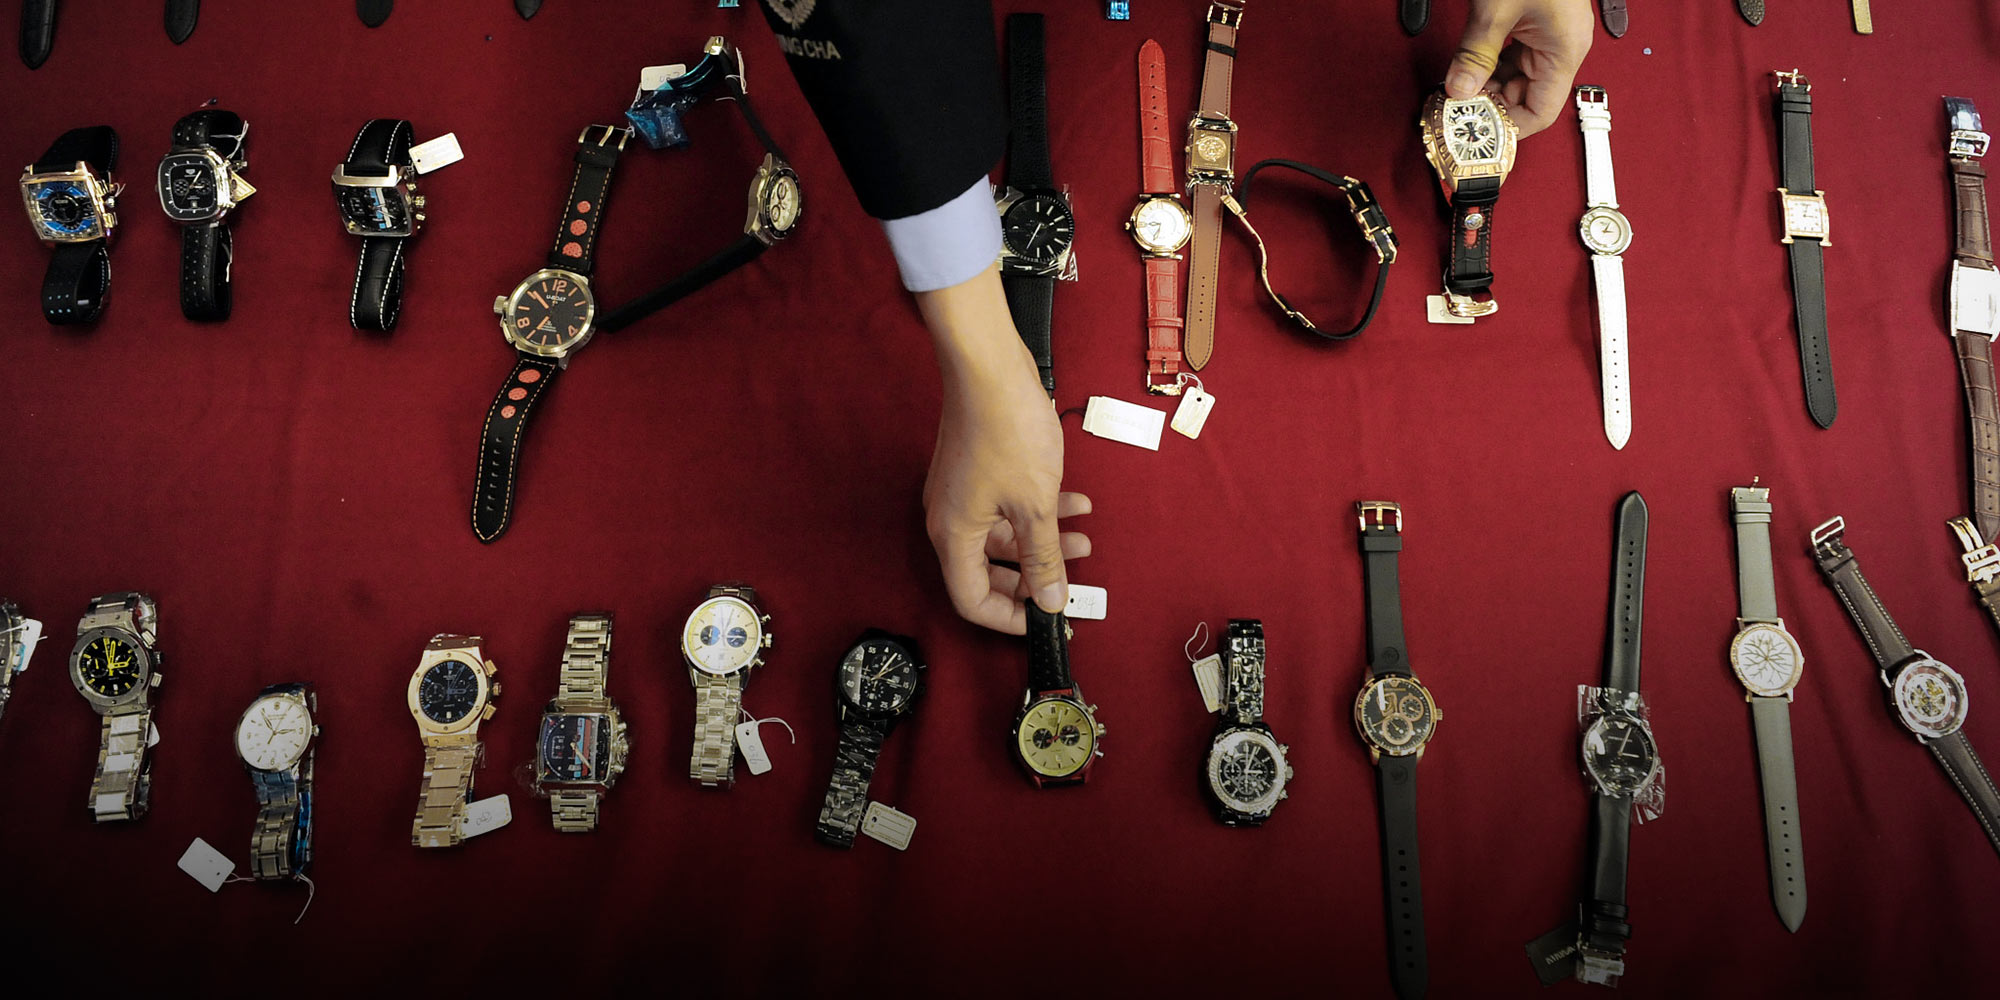 China's Counterfeit Market Was Busted